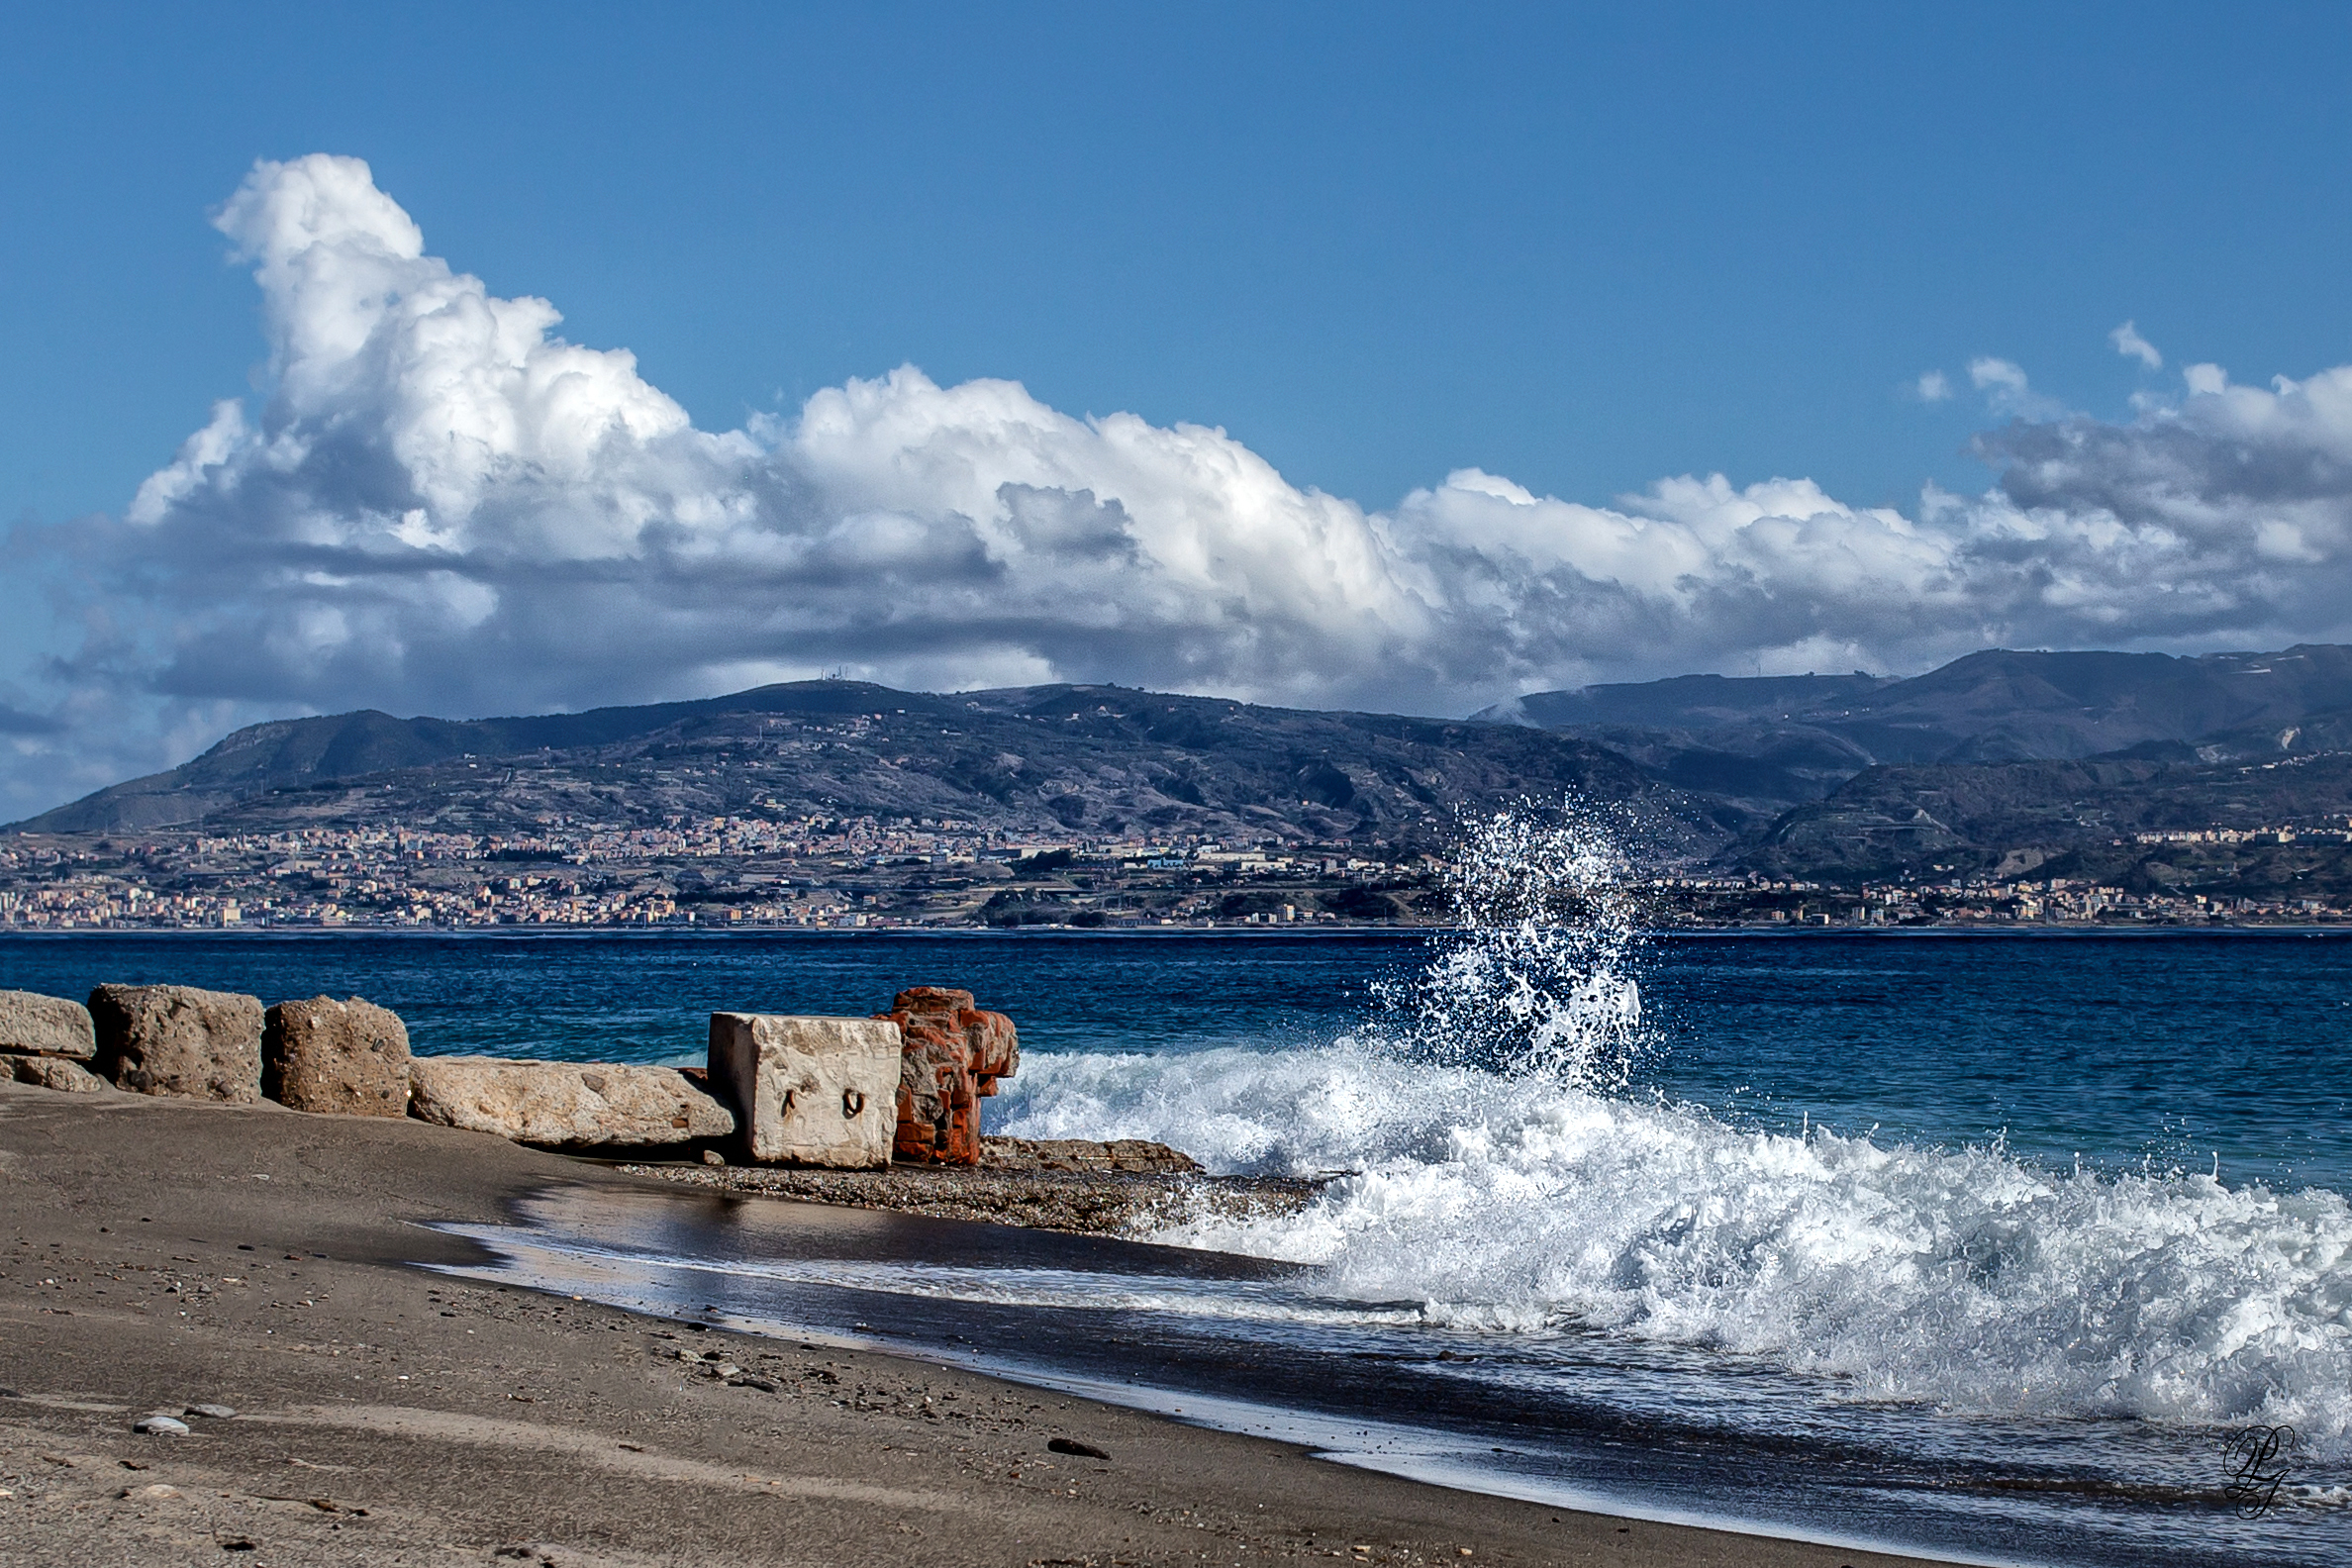 walk by the Strait of Messina ...